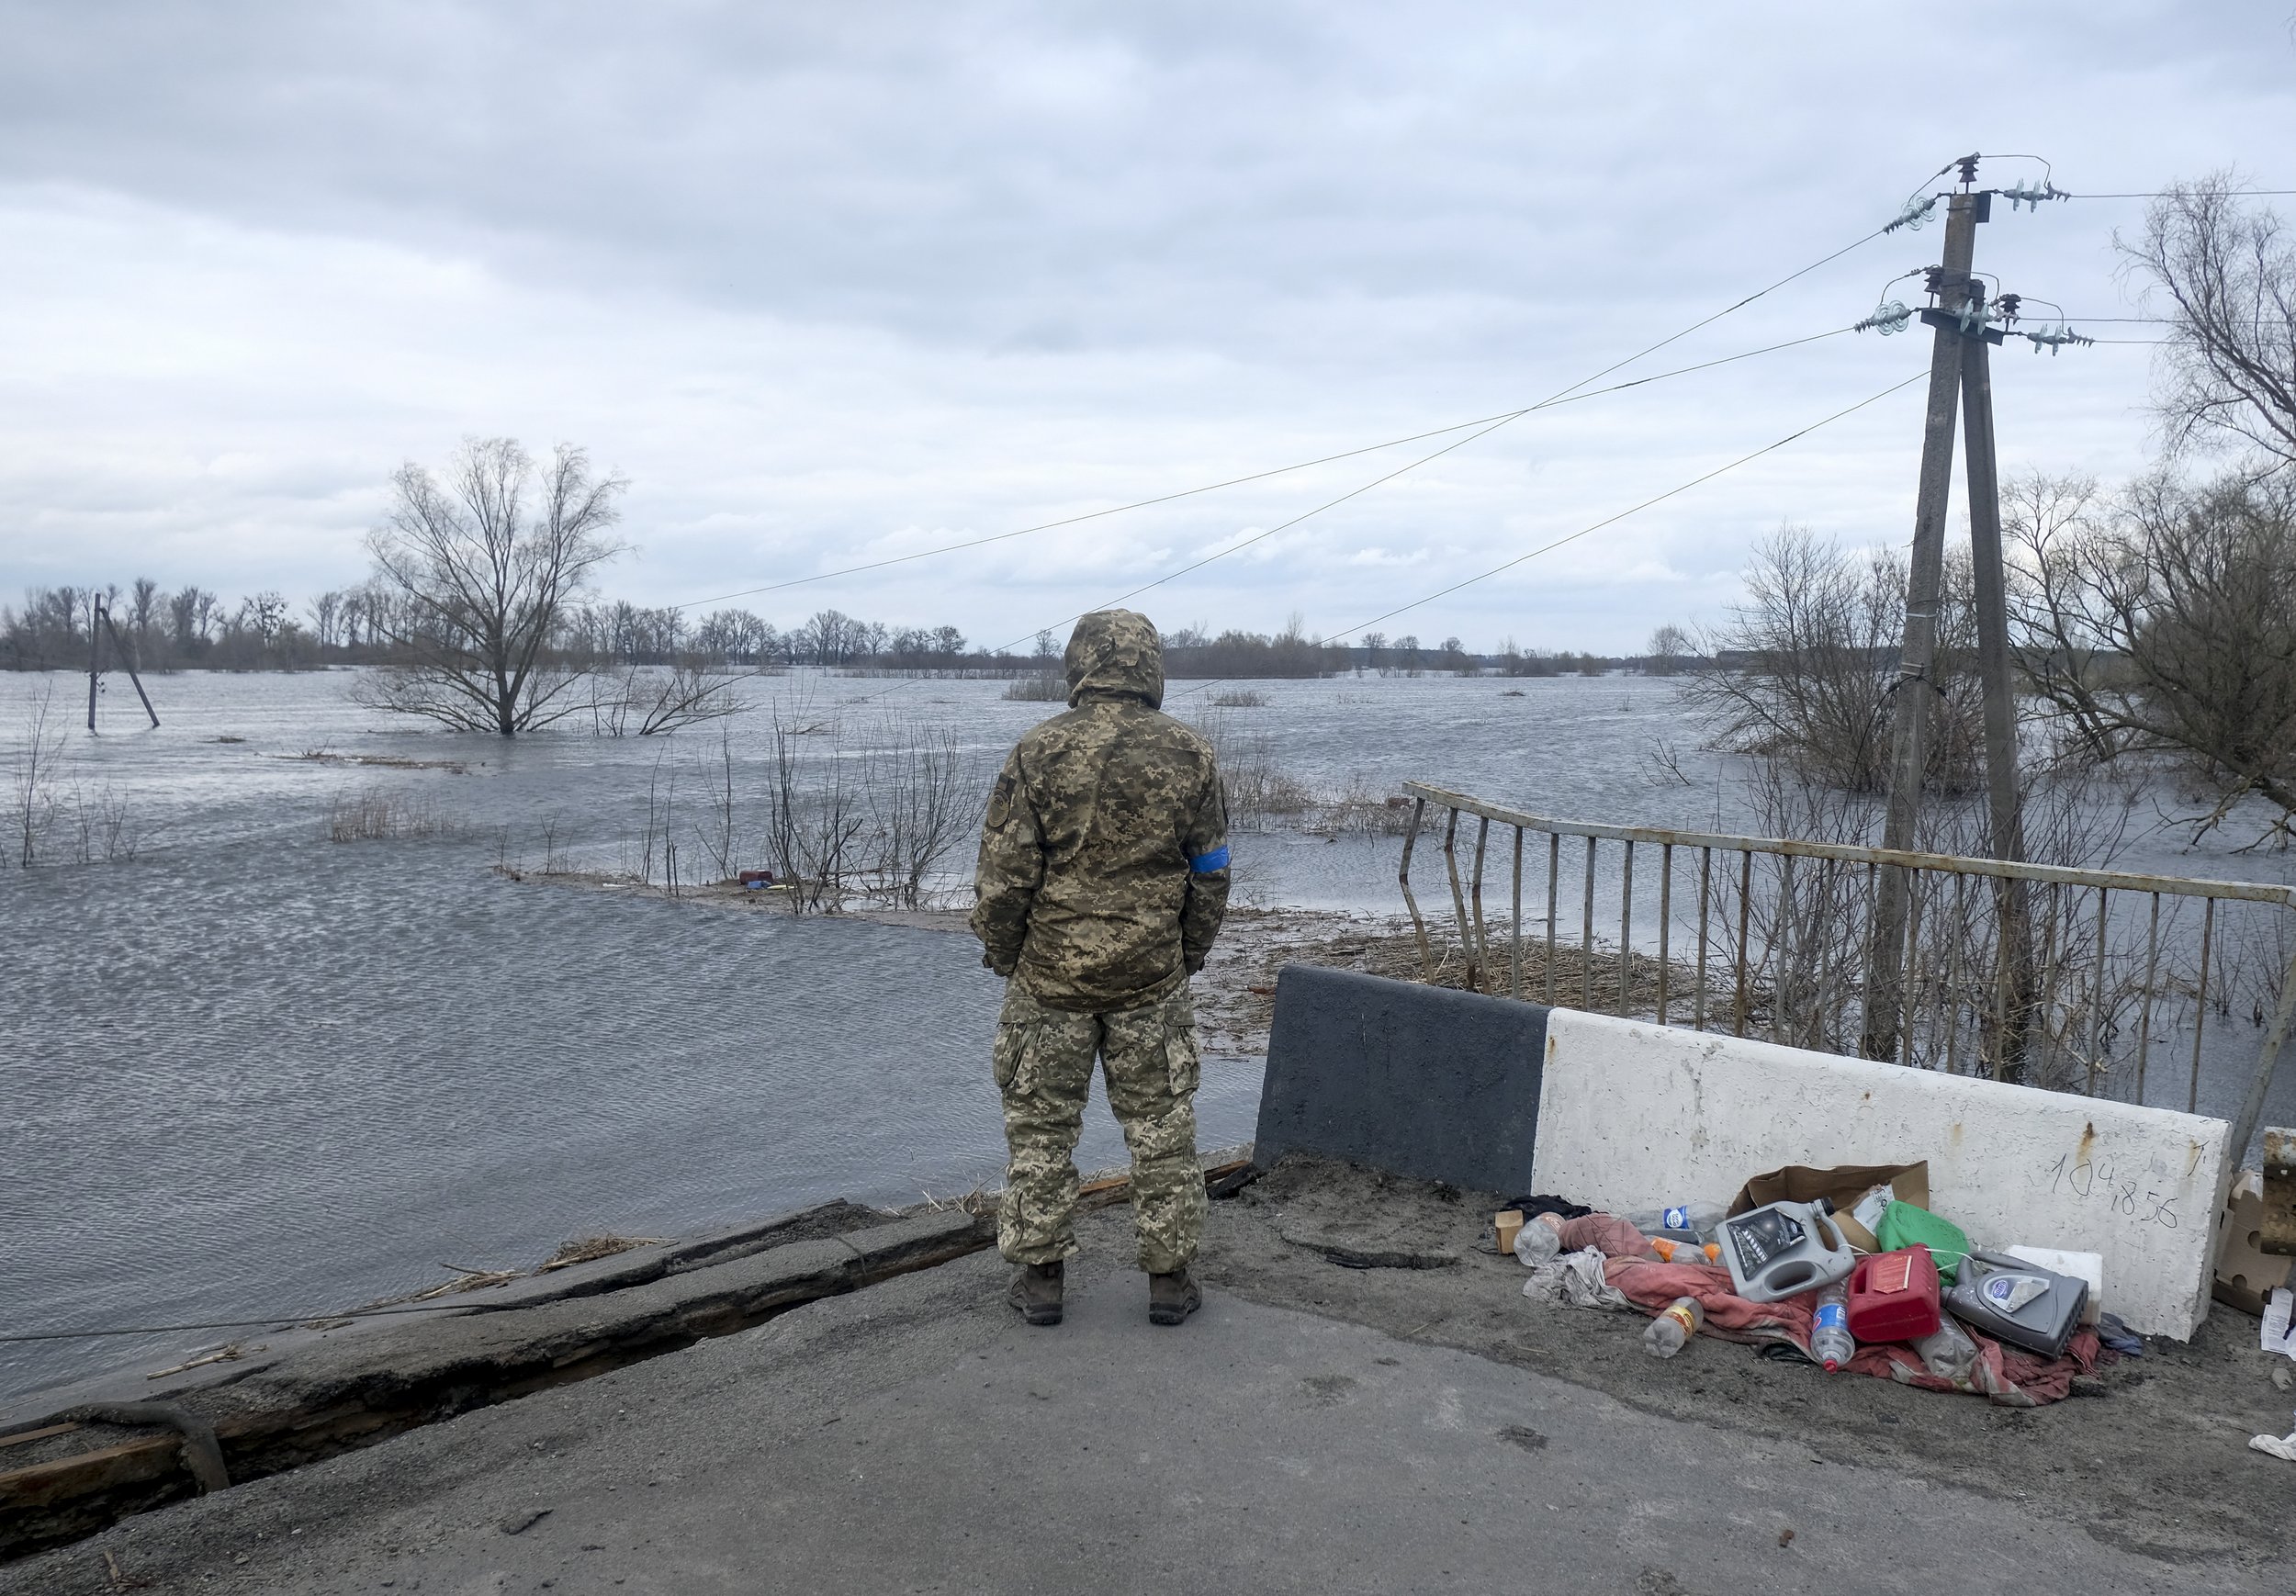  A Ukrainian soldier looks out over the flooded fields of Demydiv, Ukraine a suburb north of Kyiv on April 6, 2022. Residents of Demydiv intentionally flooded the city and destroyed bridges to prevent Russian forces from crossing the nearby river on 